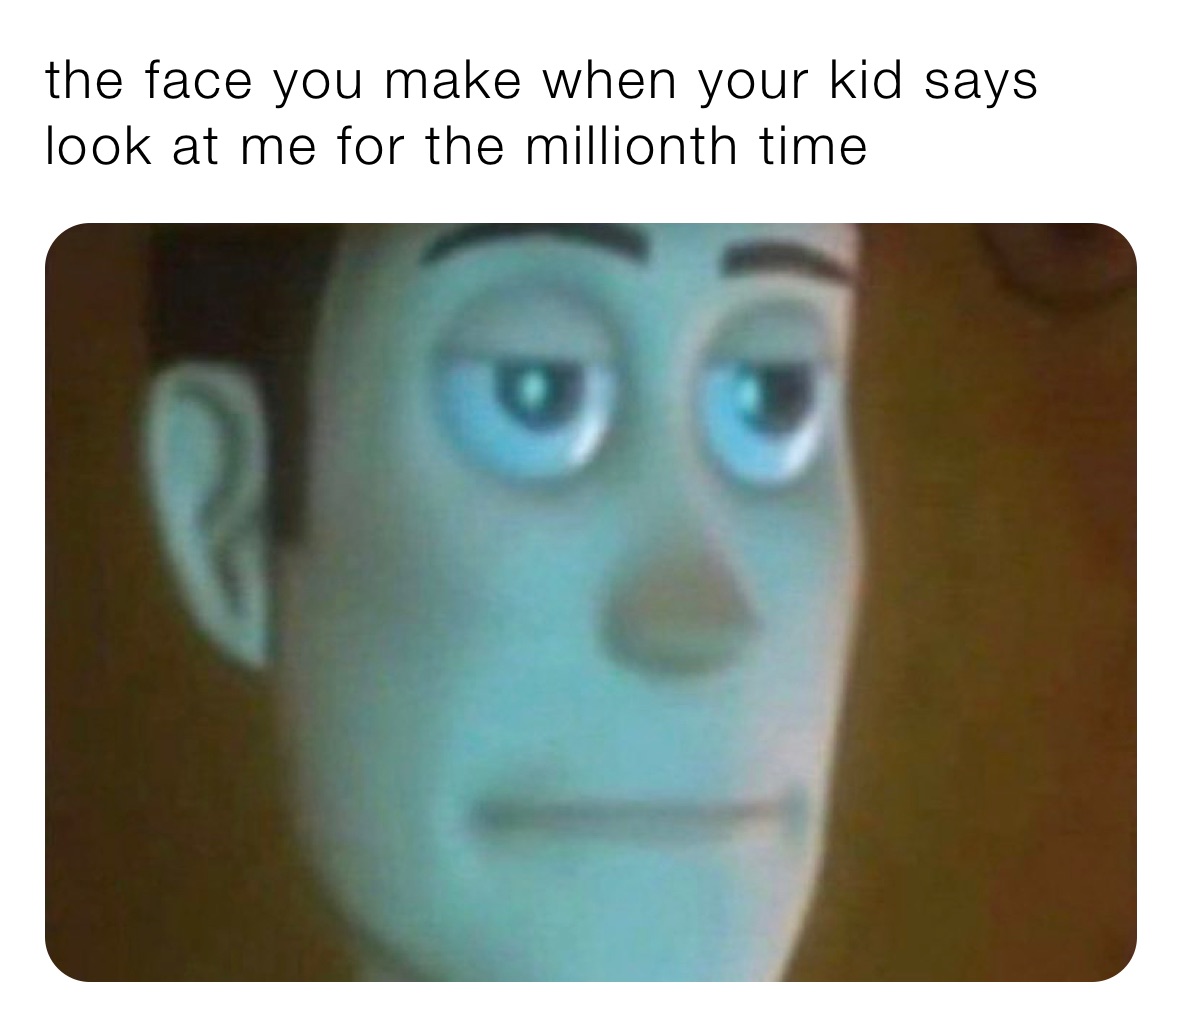 the face you make when your kid says look me for the millionth time | @samanthabg | Memes